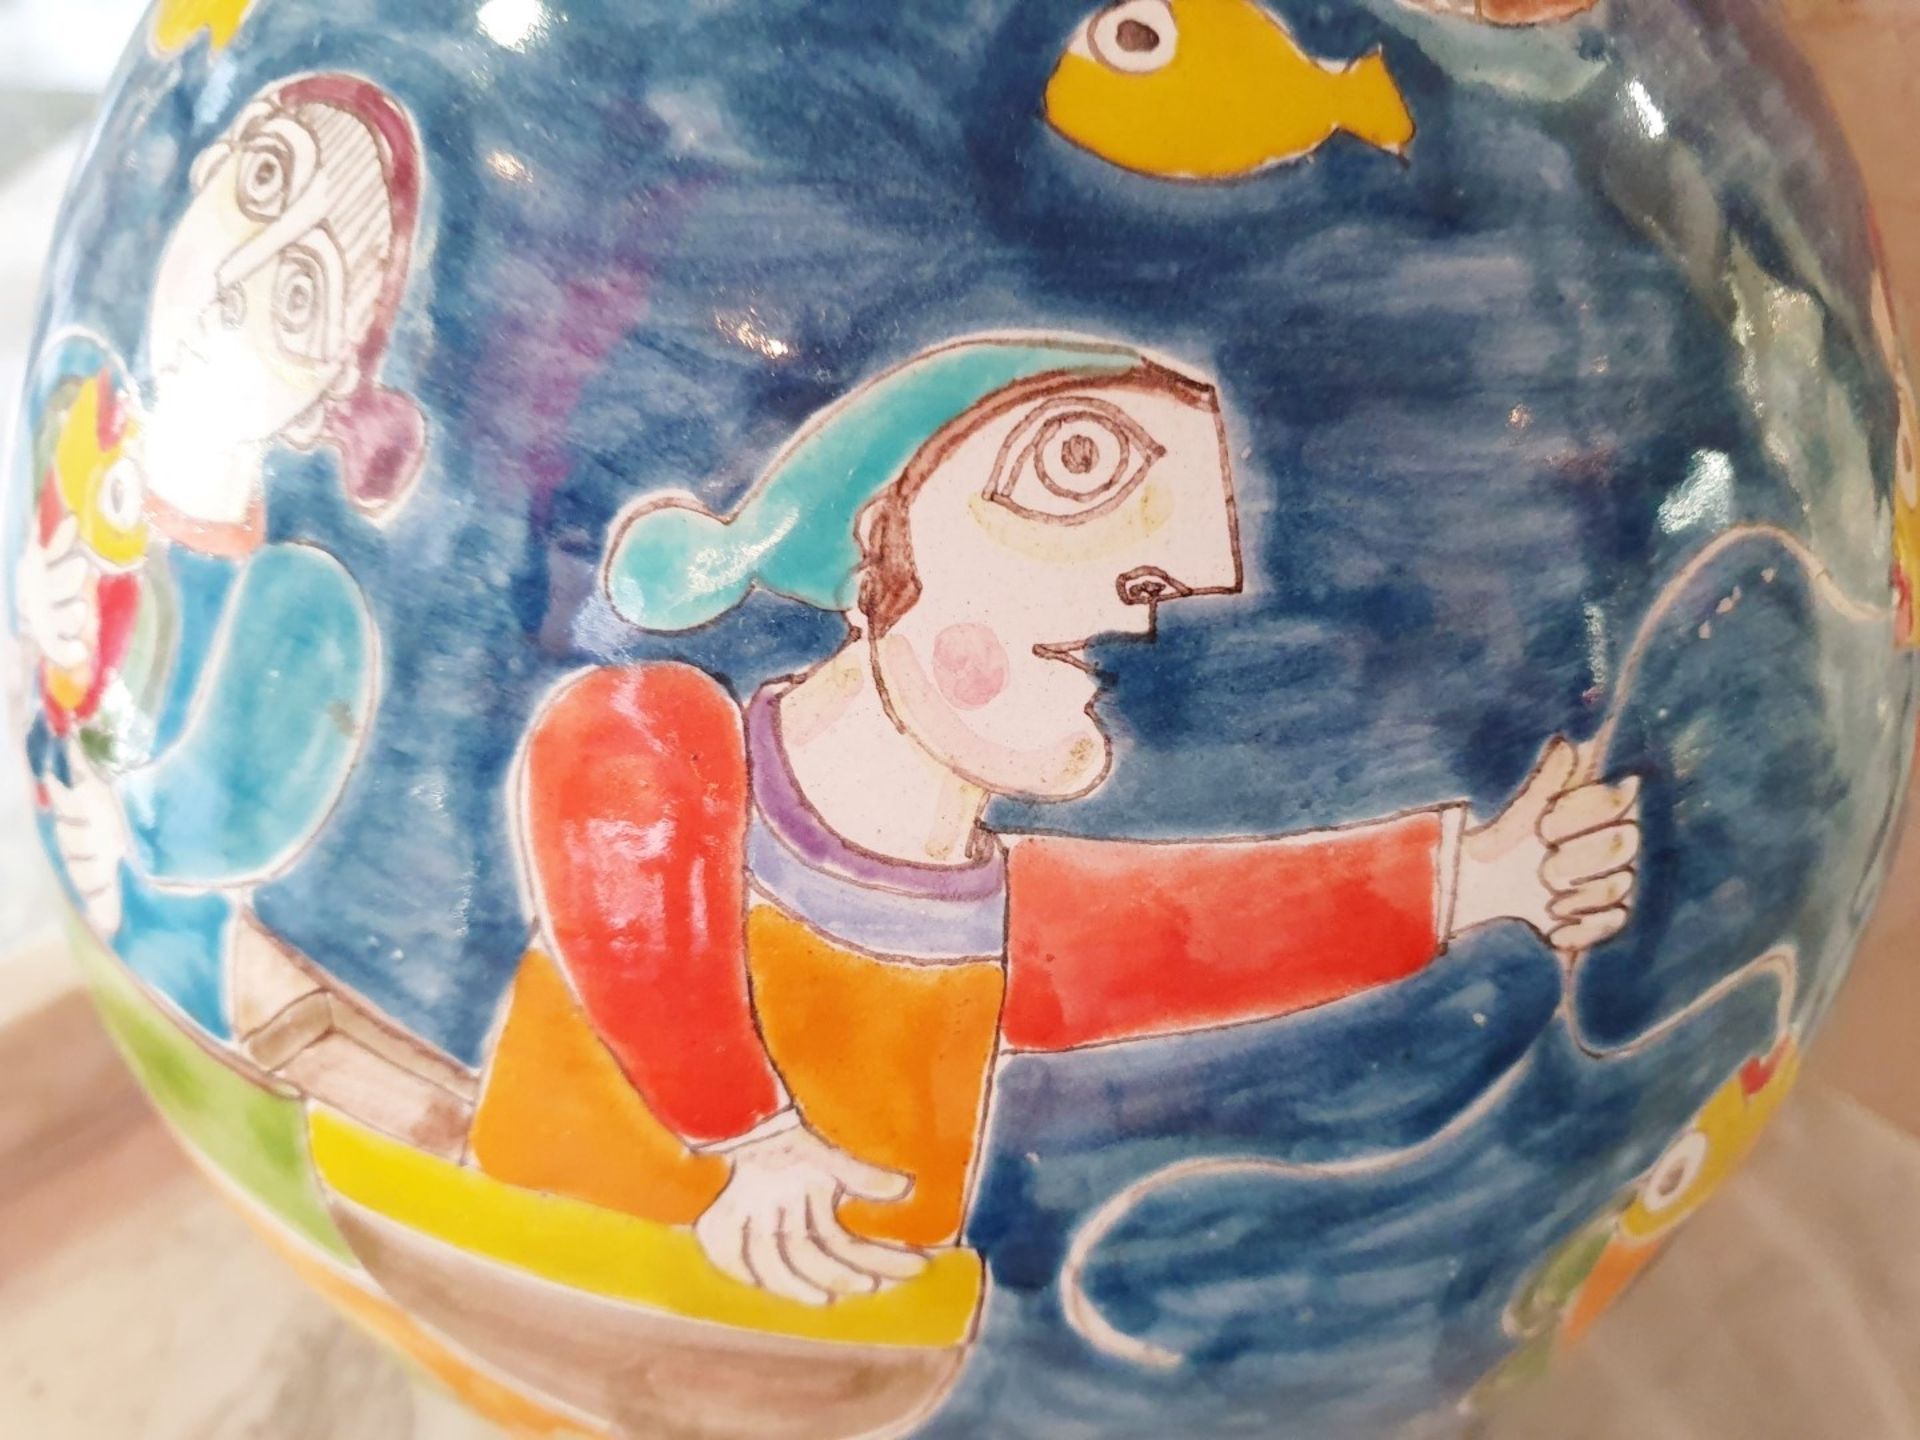 1 x Large Italian Handpainted 'Giovanni DeSimone' Fisherman Jug / Flask - Signed By The Artist - - Image 3 of 8